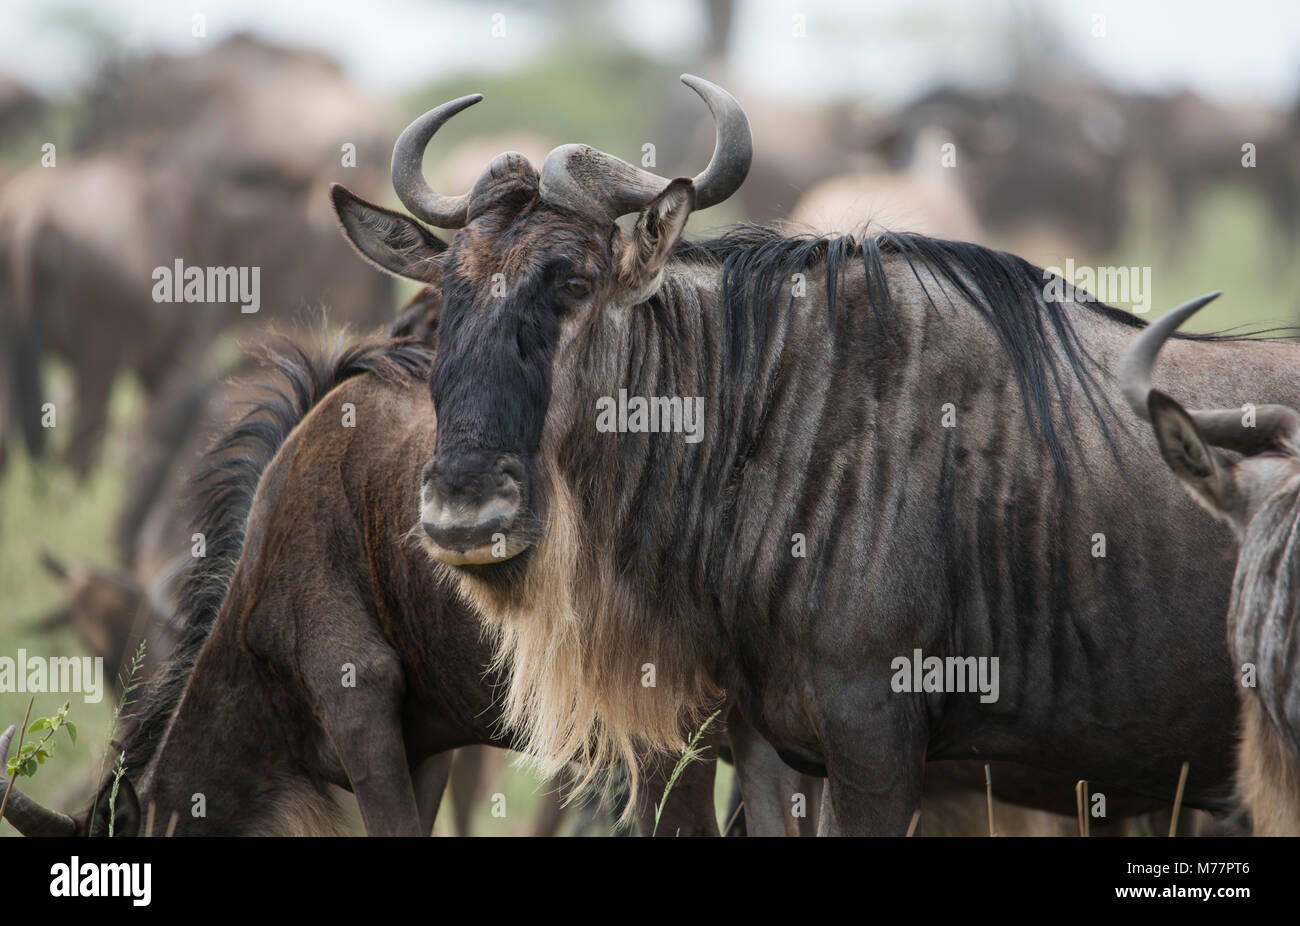 Close-up of a wildebeest (Connochaetes taurinus) in Serengeti National Park, Tanzania, East Africa, Africa Stock Photo